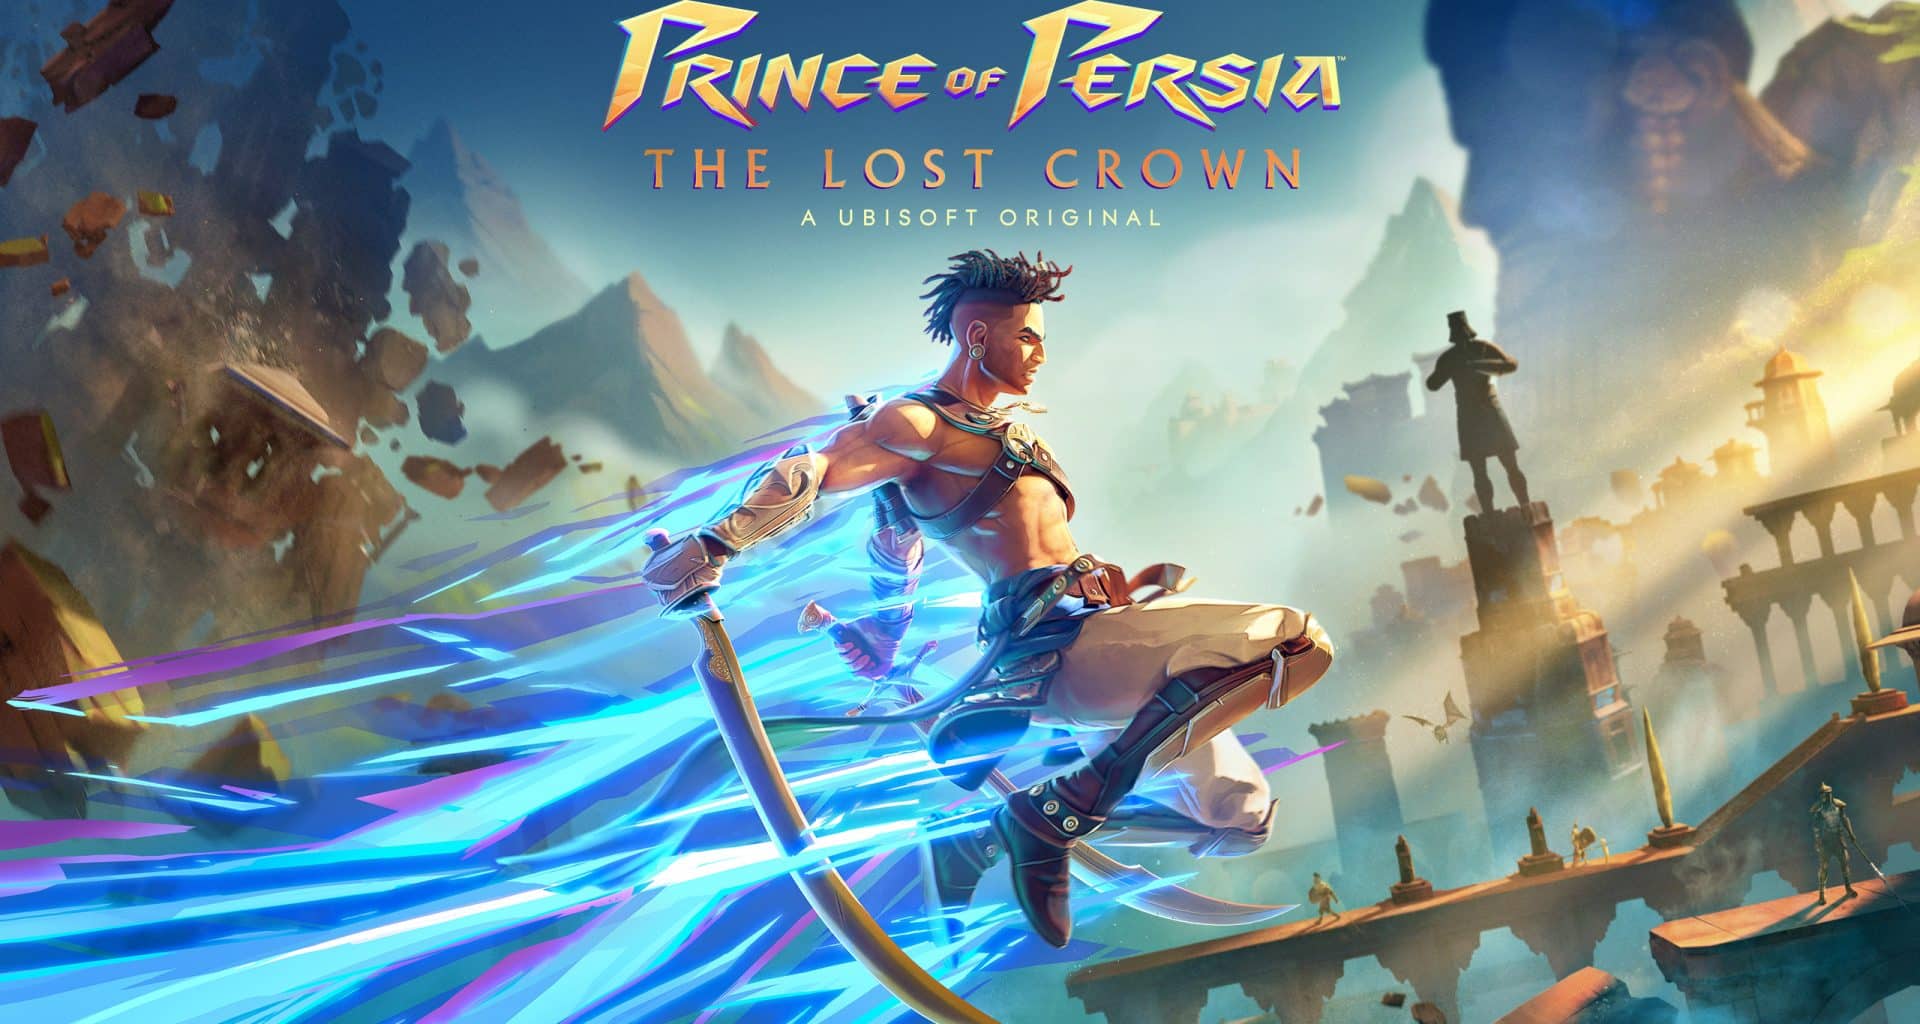 Prince of Persia: The Lost Crown Review - A Modern Take on a Fan Favorite 34534 34534